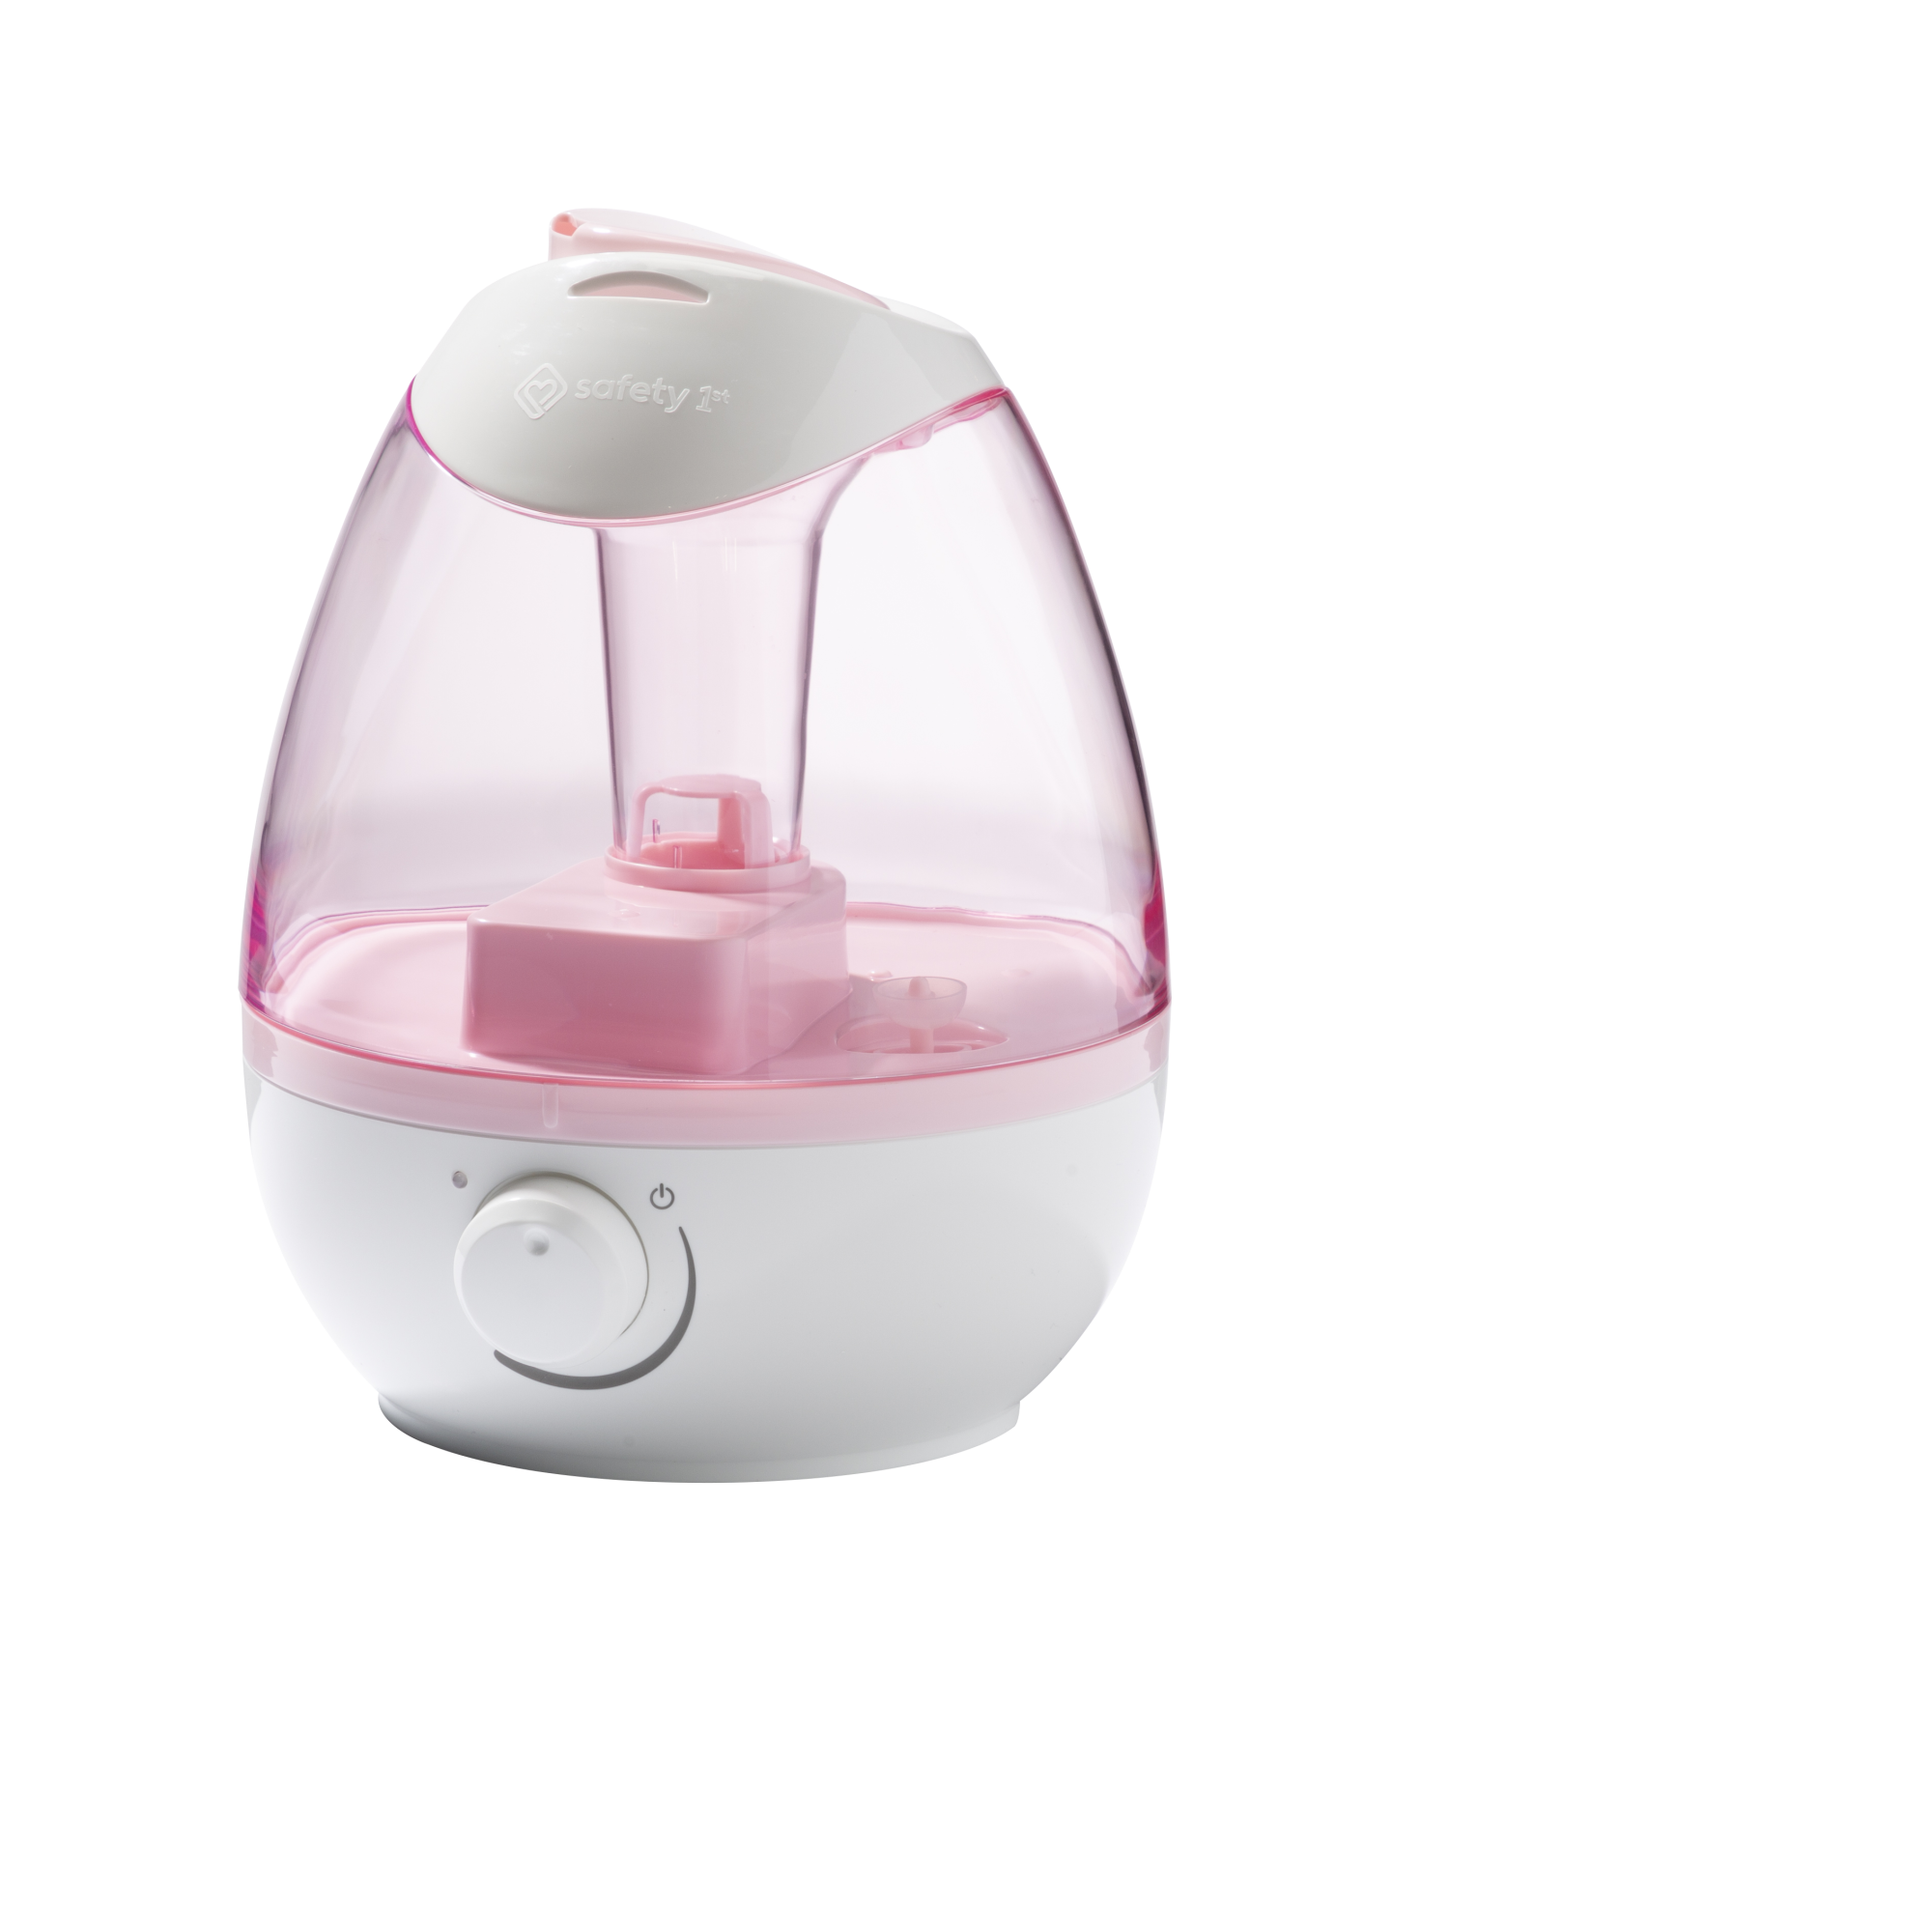 Filter Free Cool Mist Humidifier - 45 degree angle front view